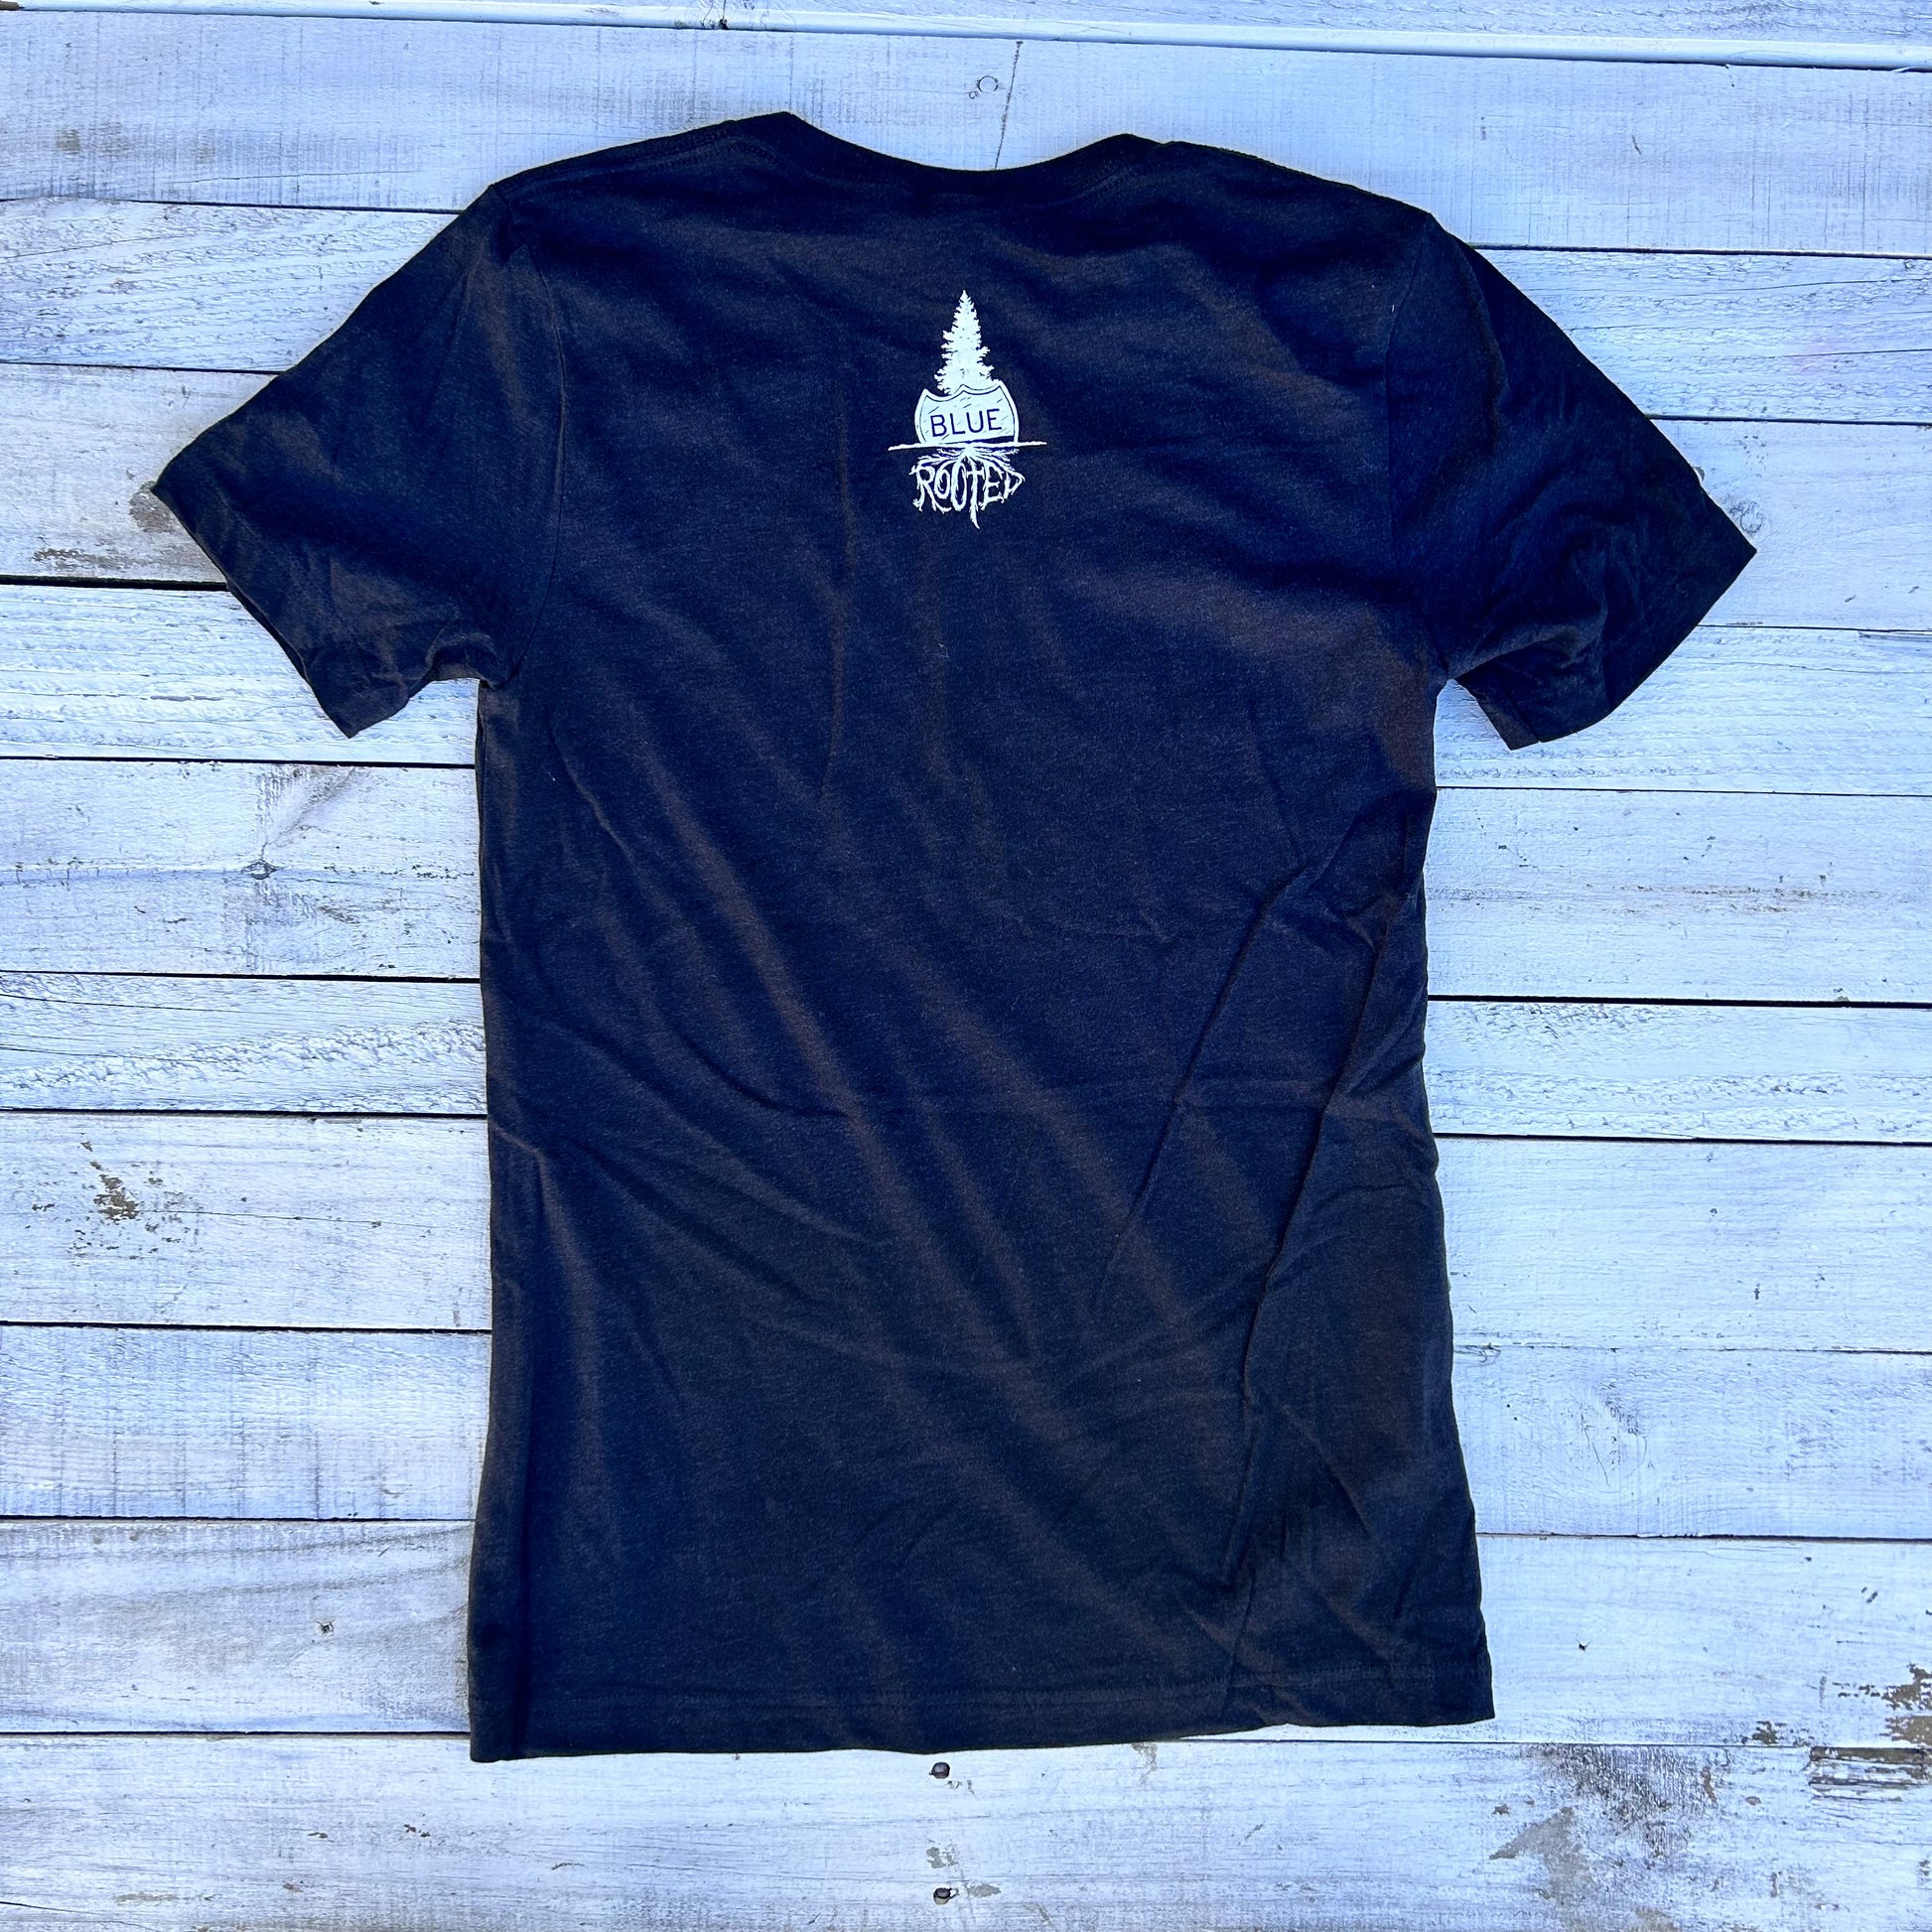 BlueRooted DELCO Midnight T